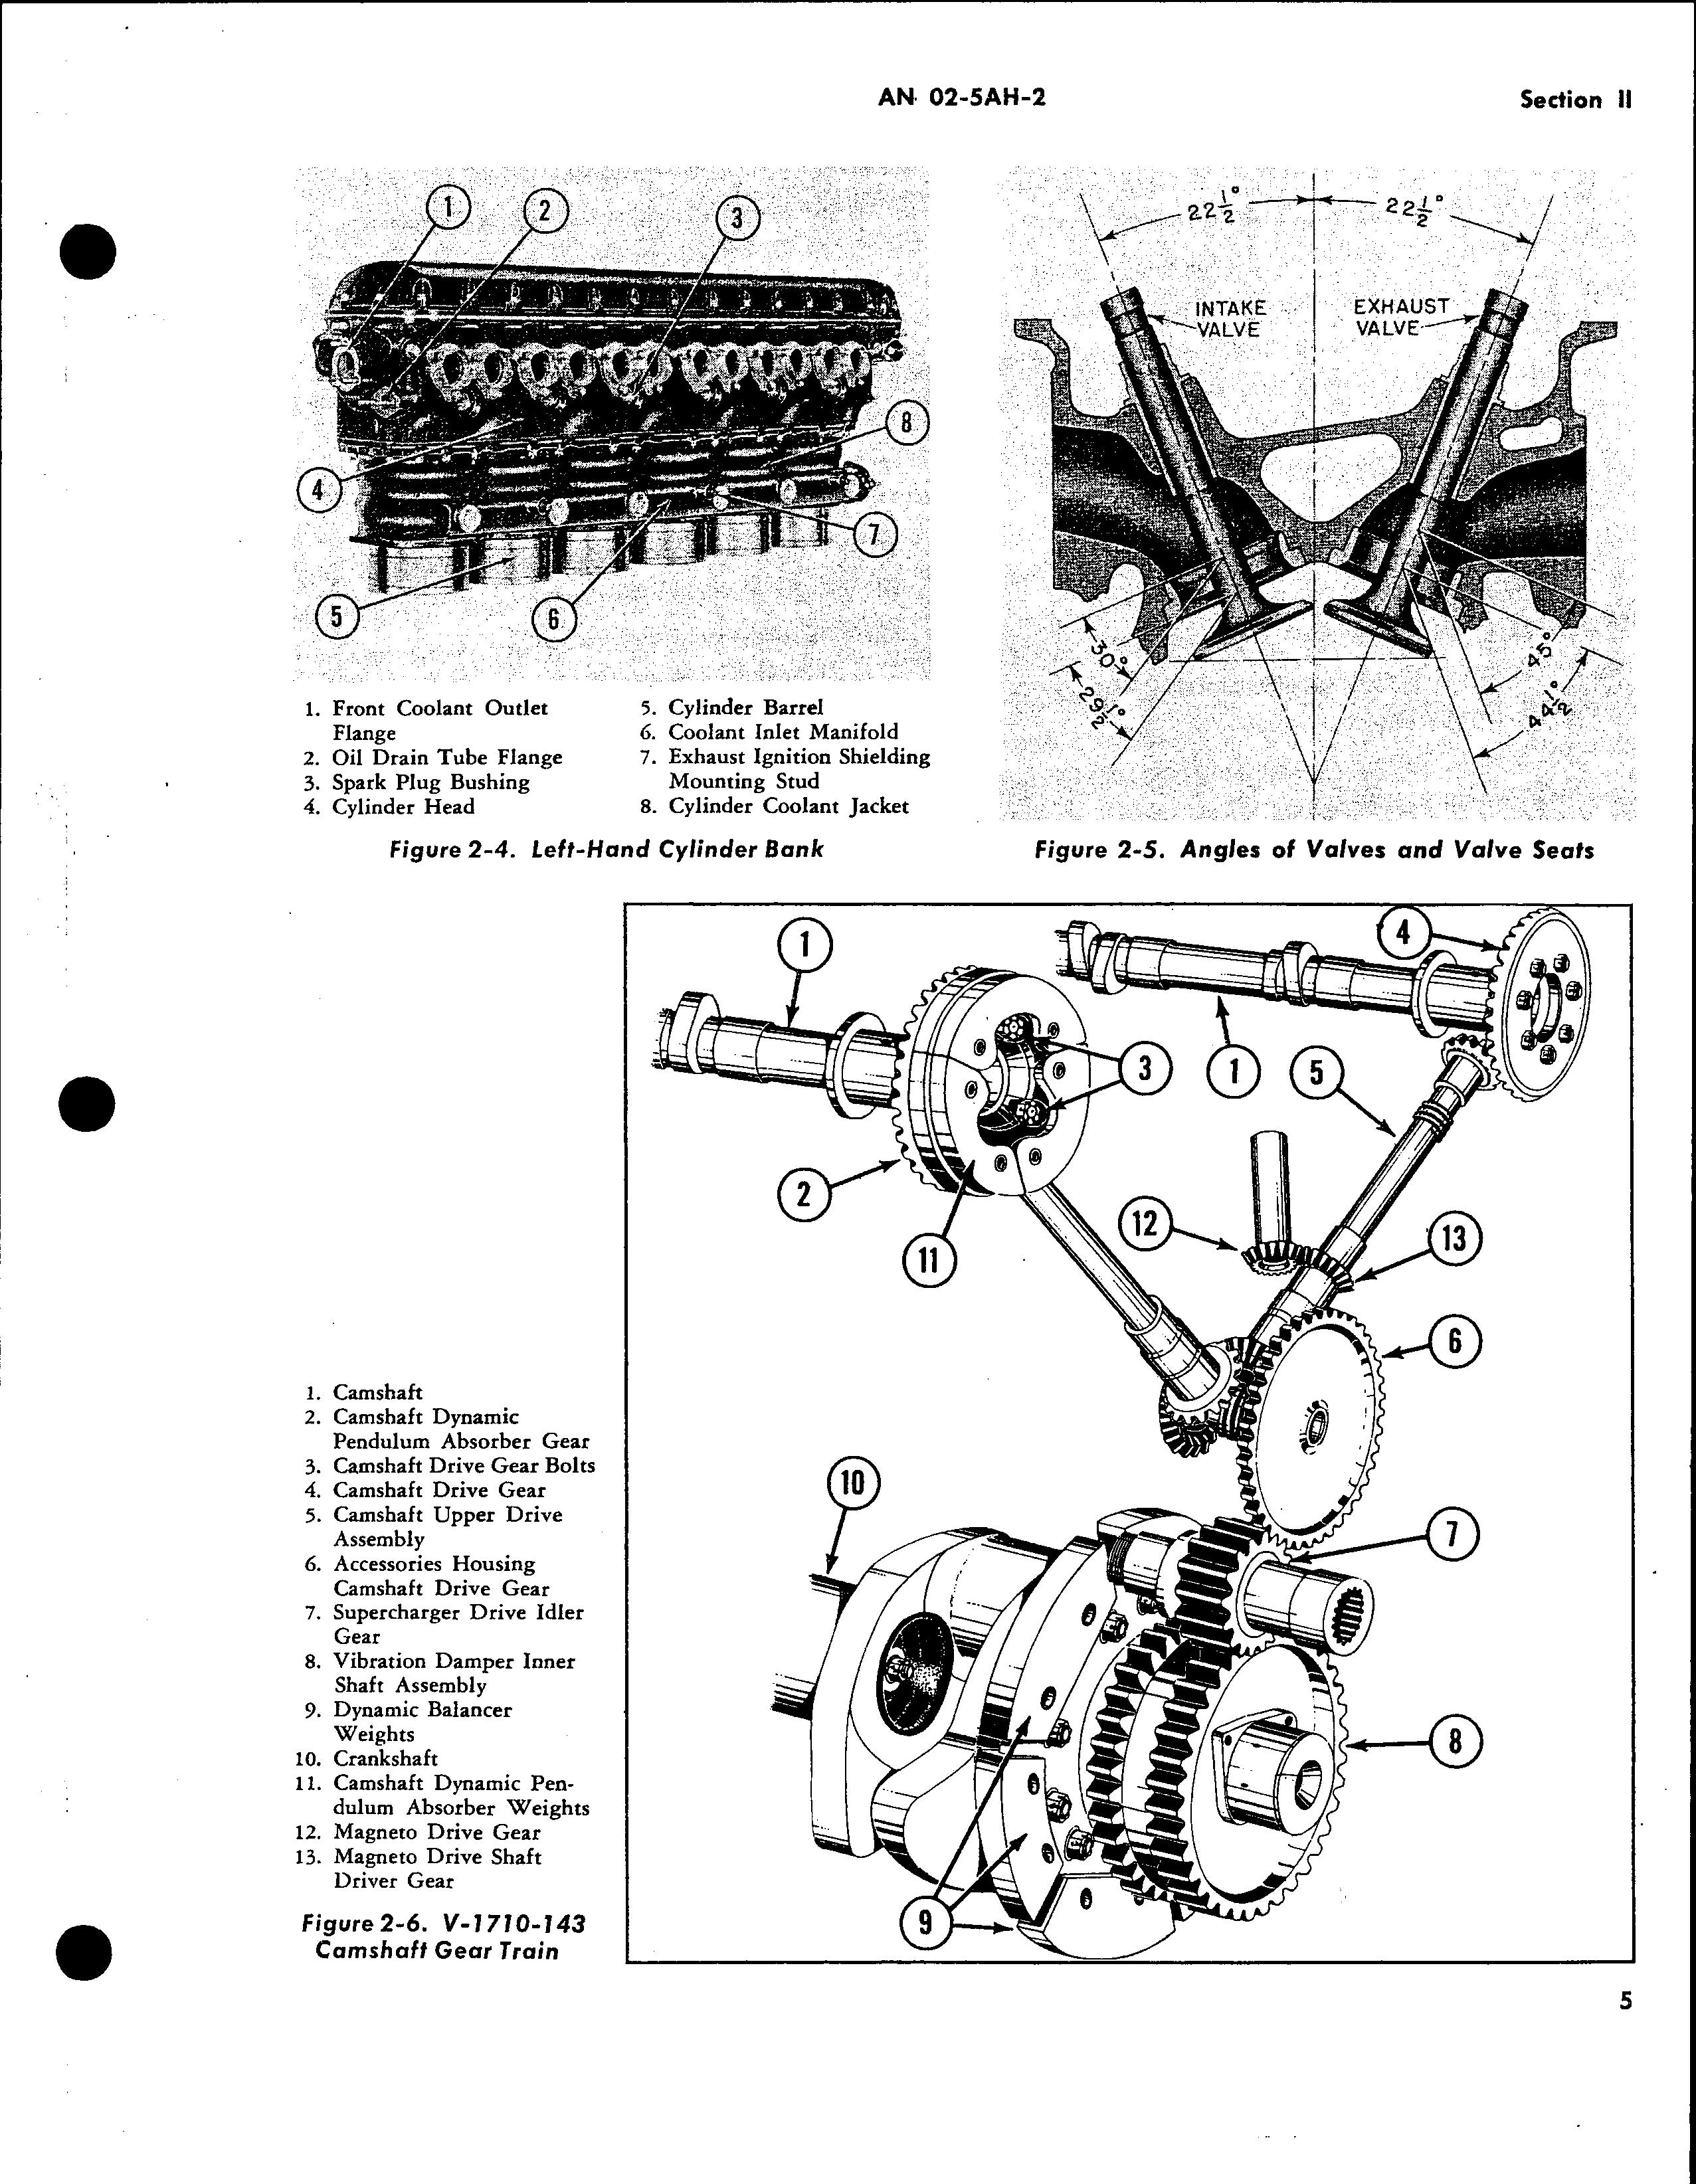 Sample page 9 from AirCorps Library document: Service Instructions for Models V-1710-143 and -145 Aircraft Engines